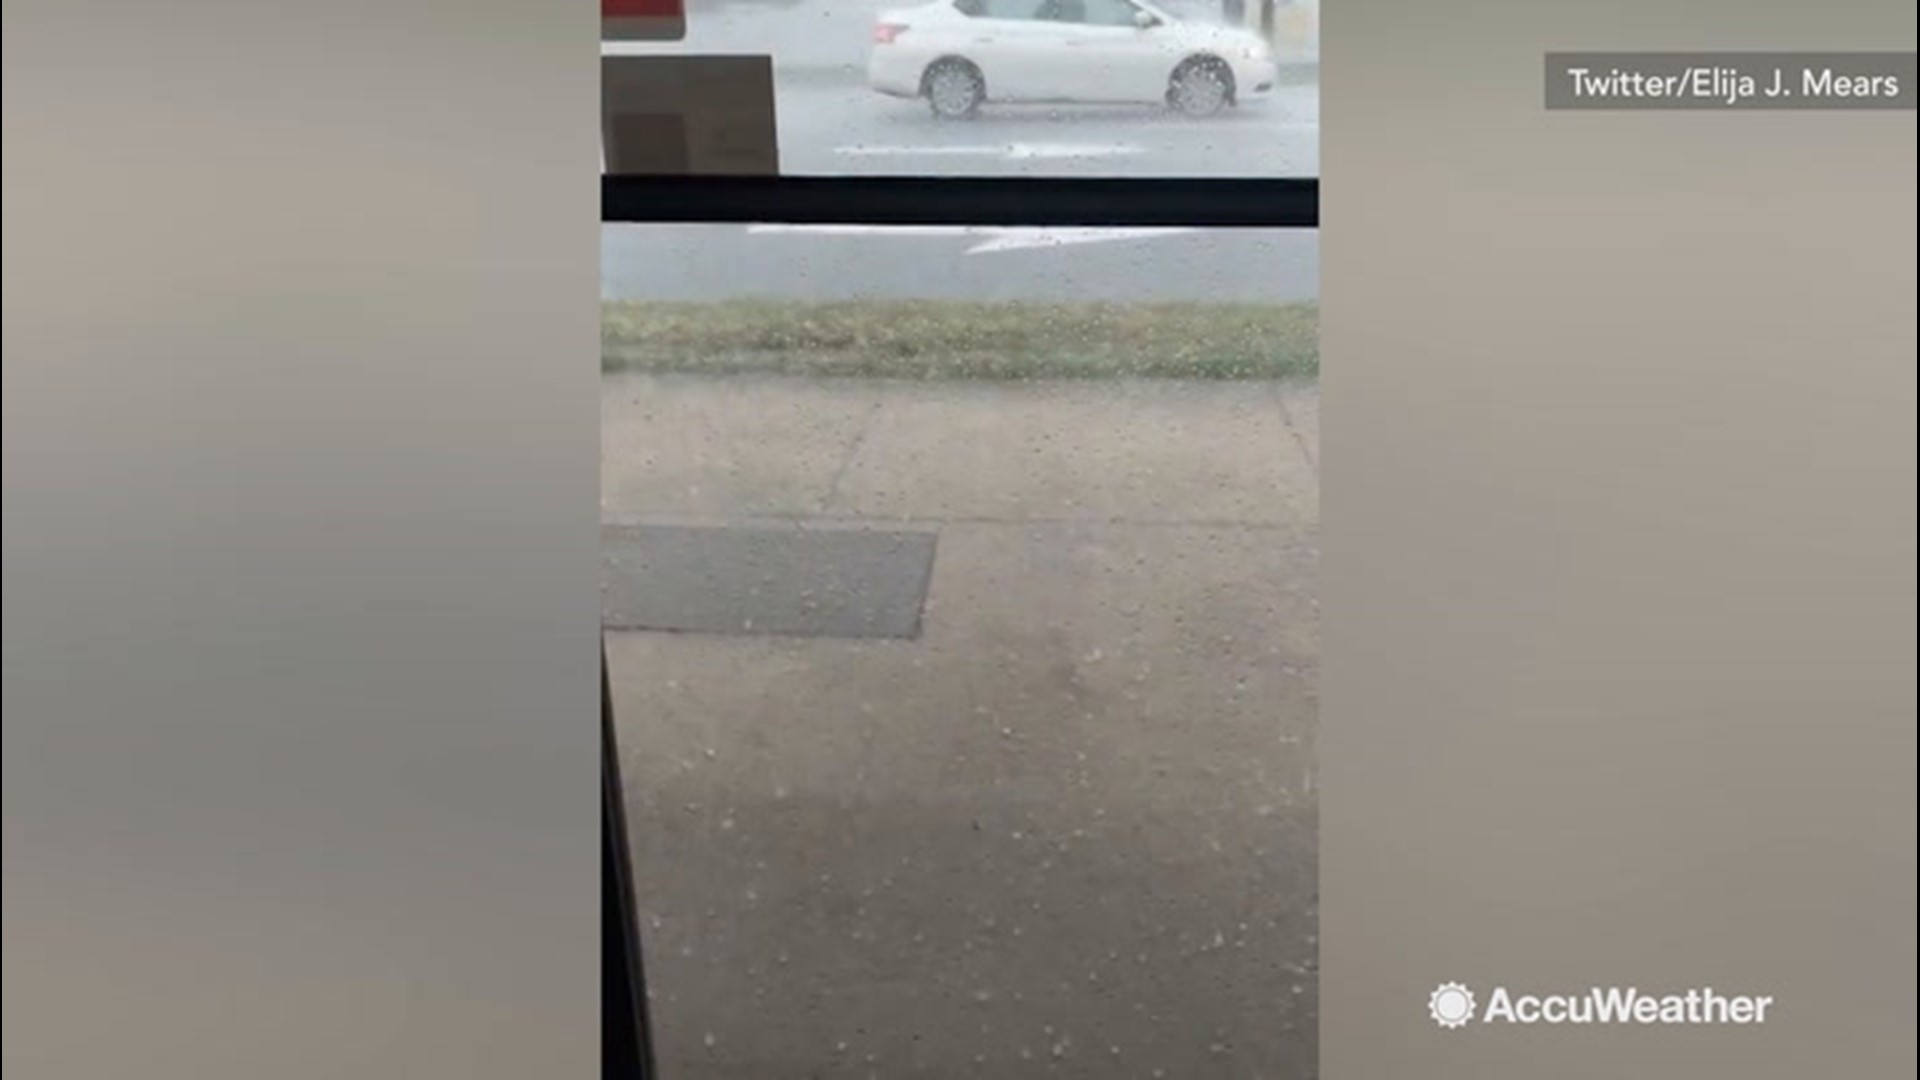 The hail in North Carolina continues, and this time we have footage from Greensboro on Aug. 19. These residents made a smart choice to stay inside as the storm passed through.